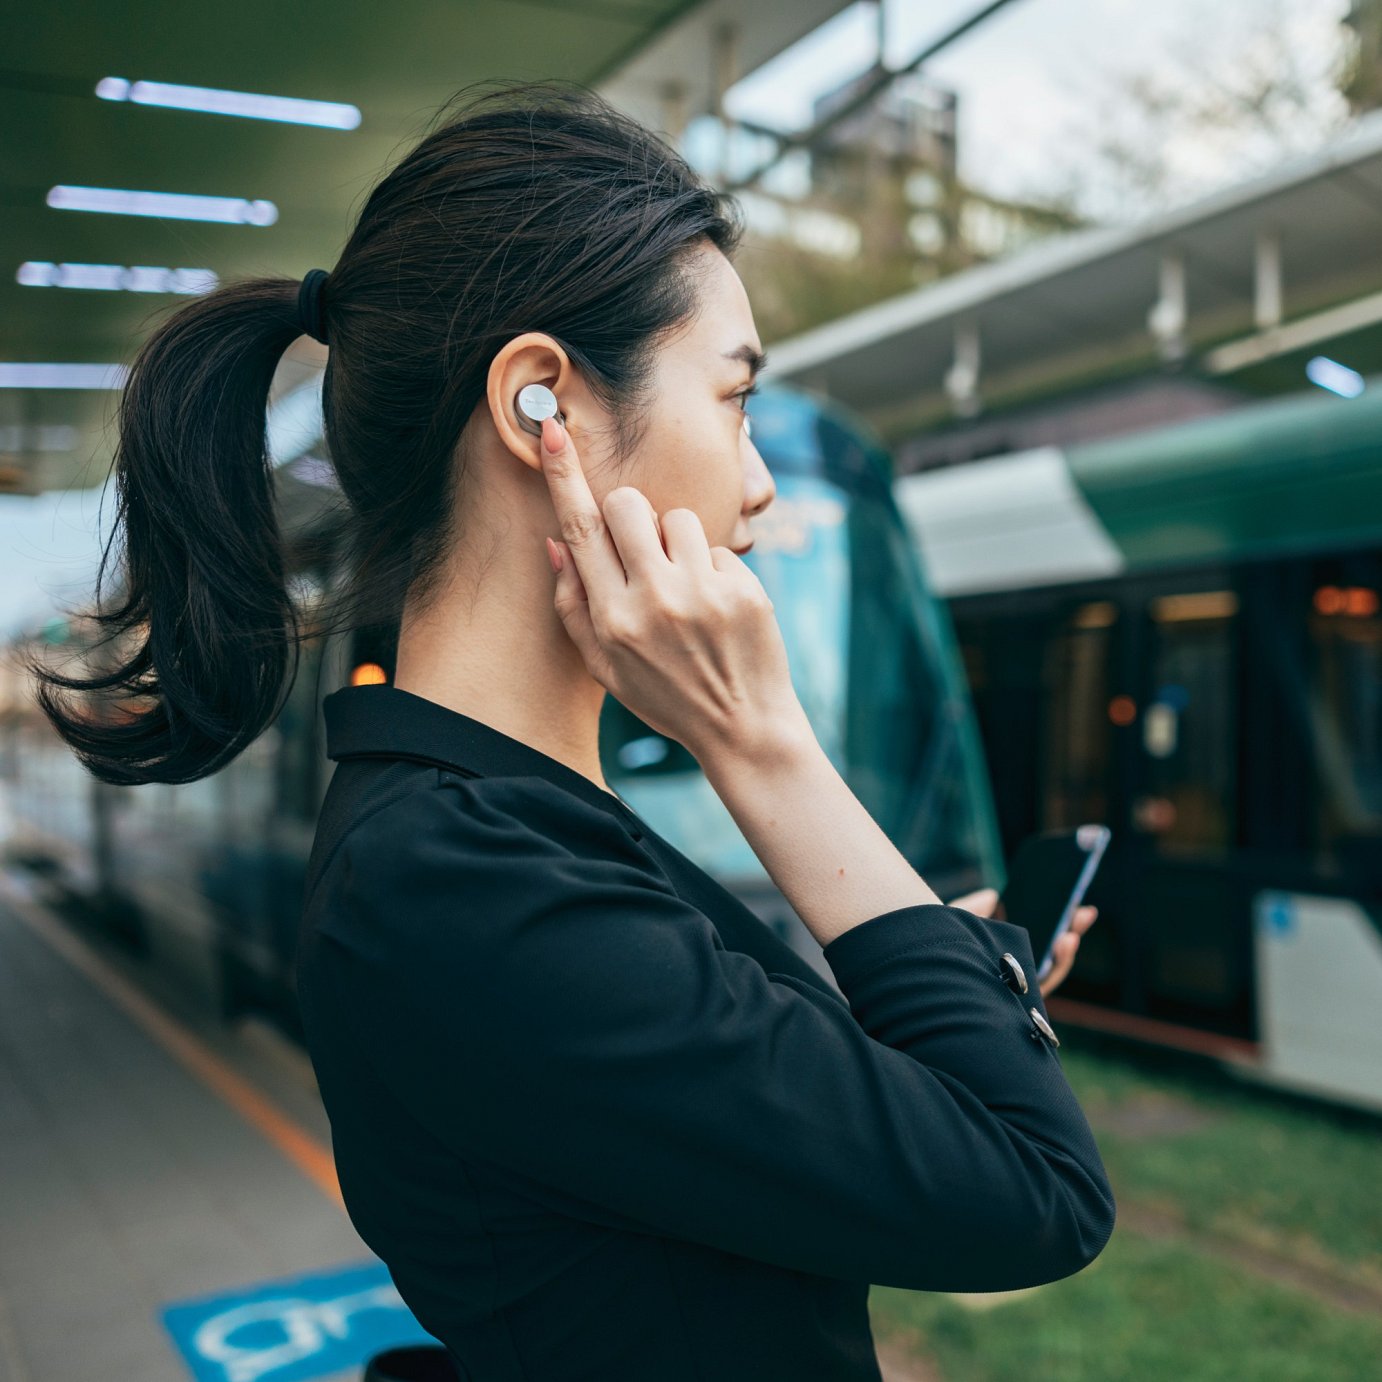 An Asian female businesswoman uses a Bluetooth headset and mobile device to work remotely and discuss work projects with colleagues outside the office while waiting for the subway. By connecting the Bluetooth headset to the mobile device, she can also listen to music or work remotely, communicating and interacting with clients or subordinates during her commute.